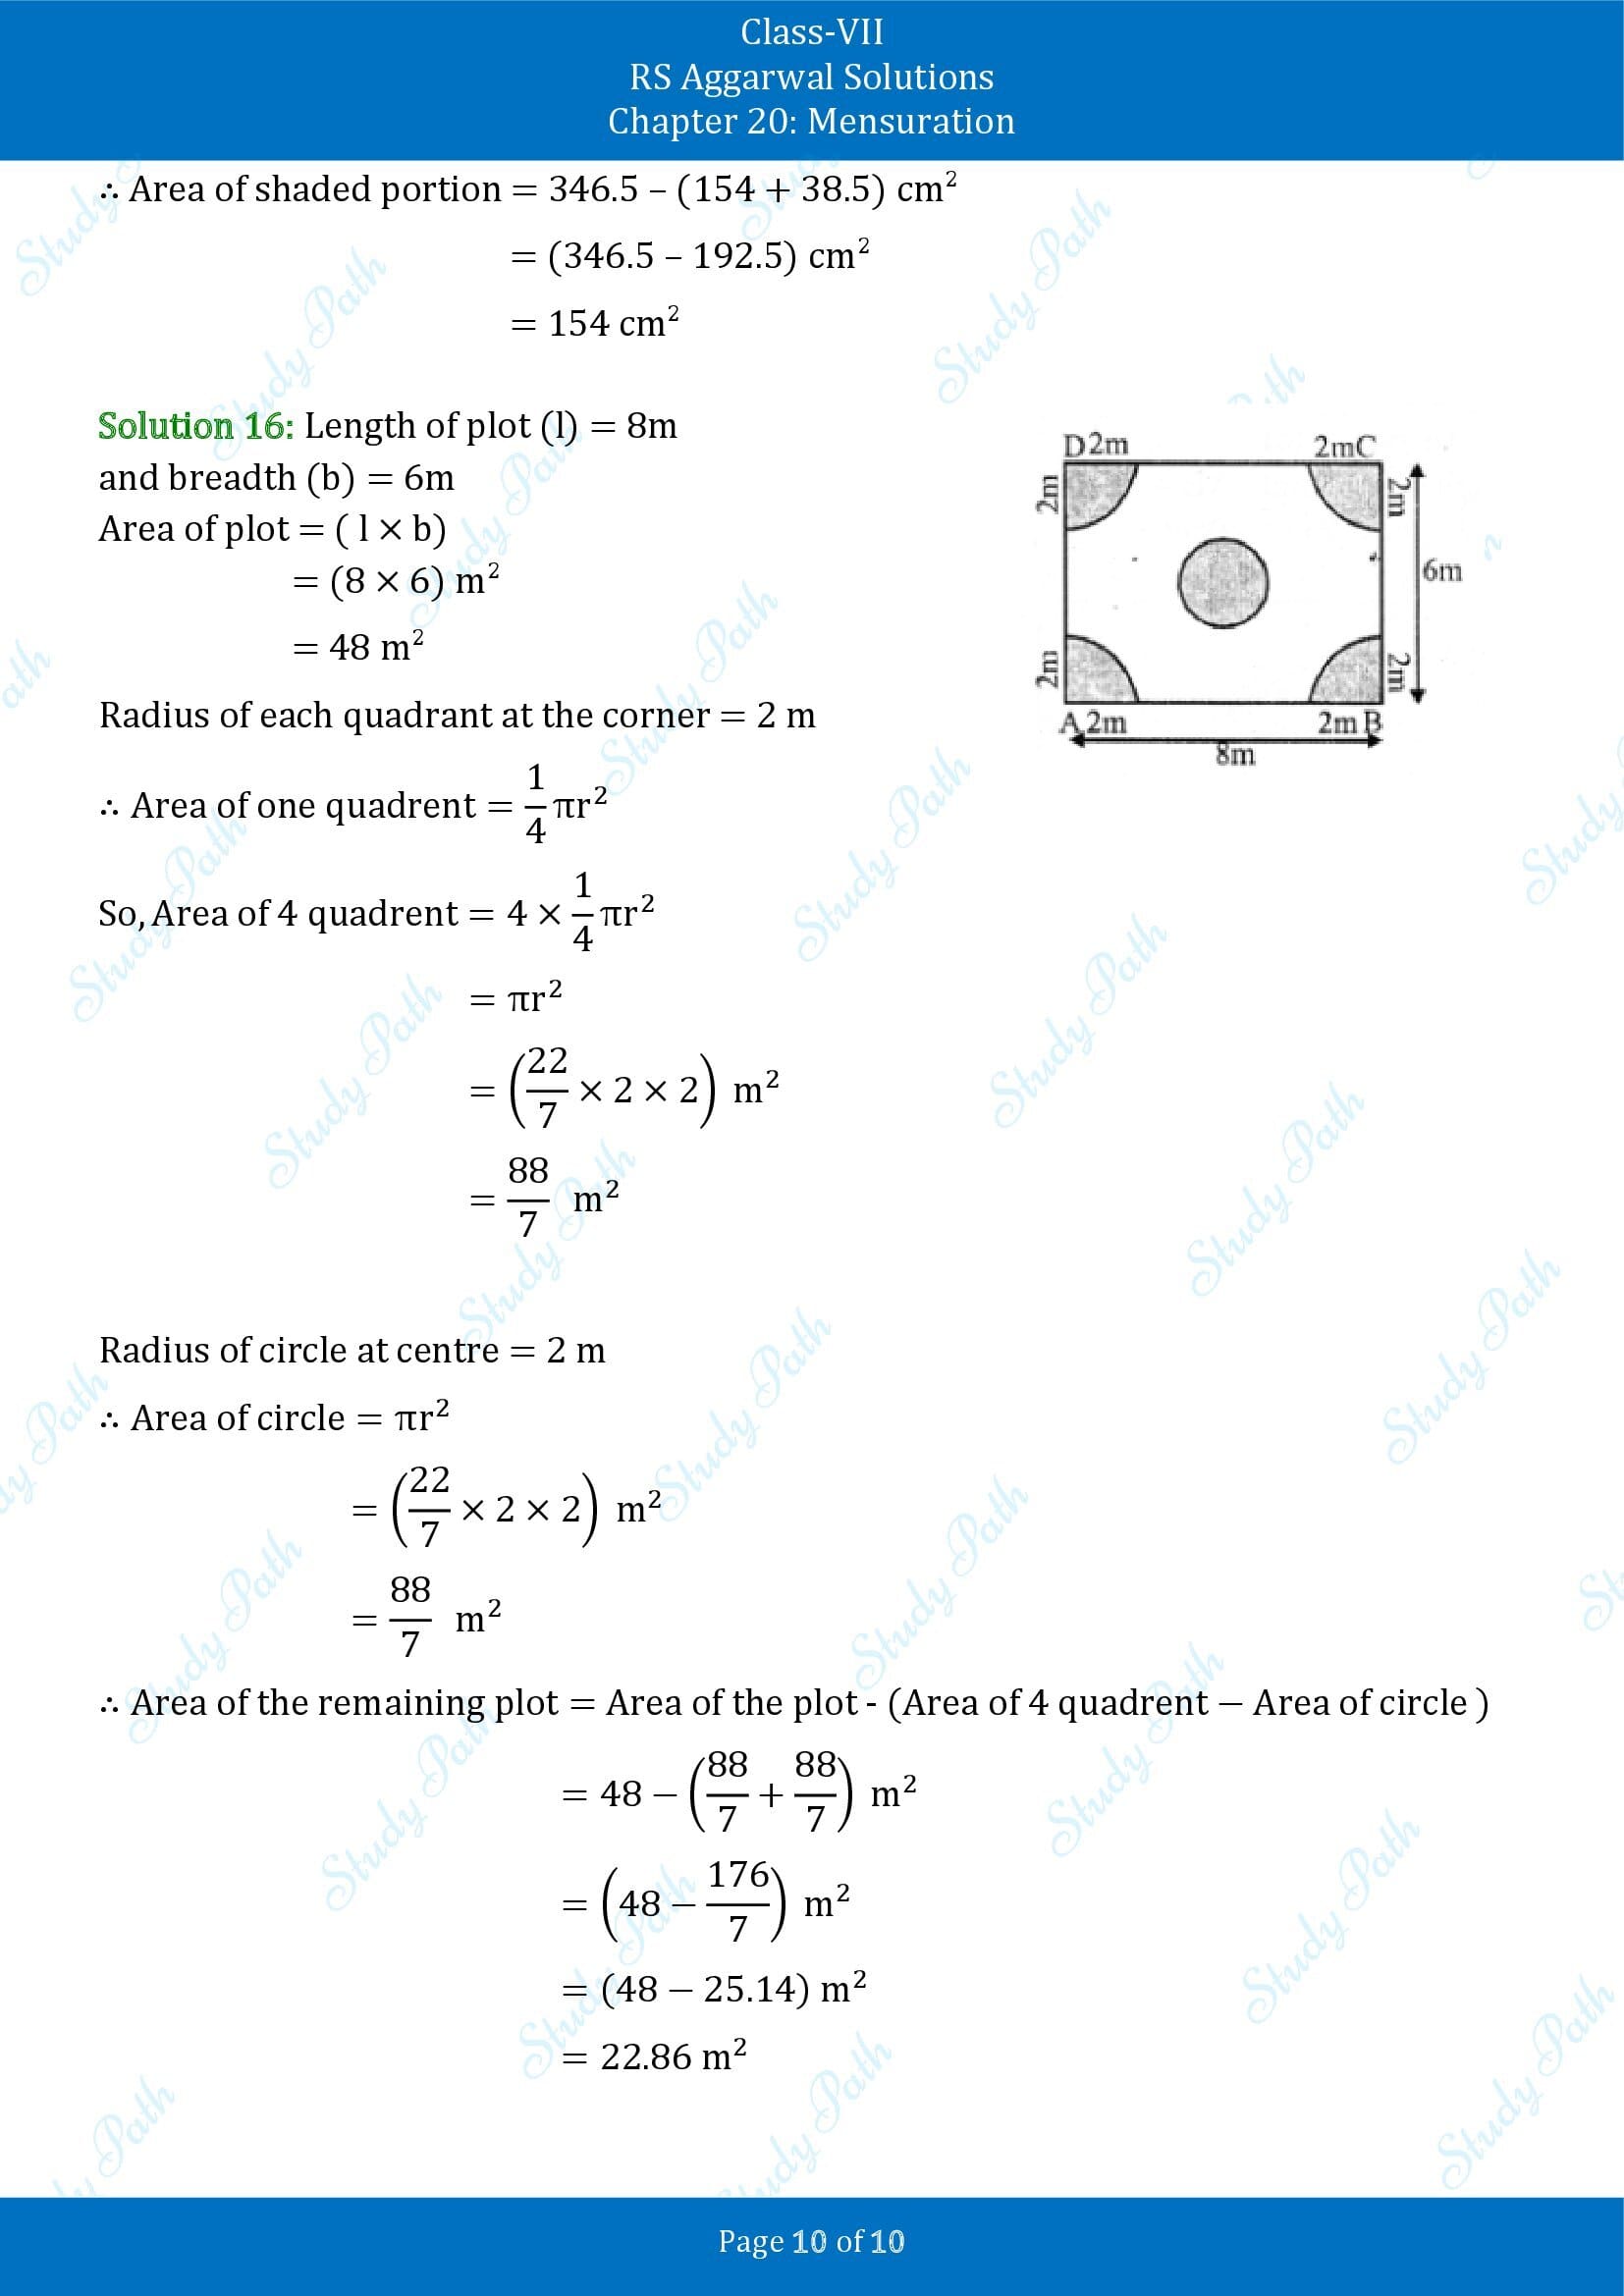 RS Aggarwal Solutions Class 7 Chapter 20 Mensuration Exercise 20F 00010